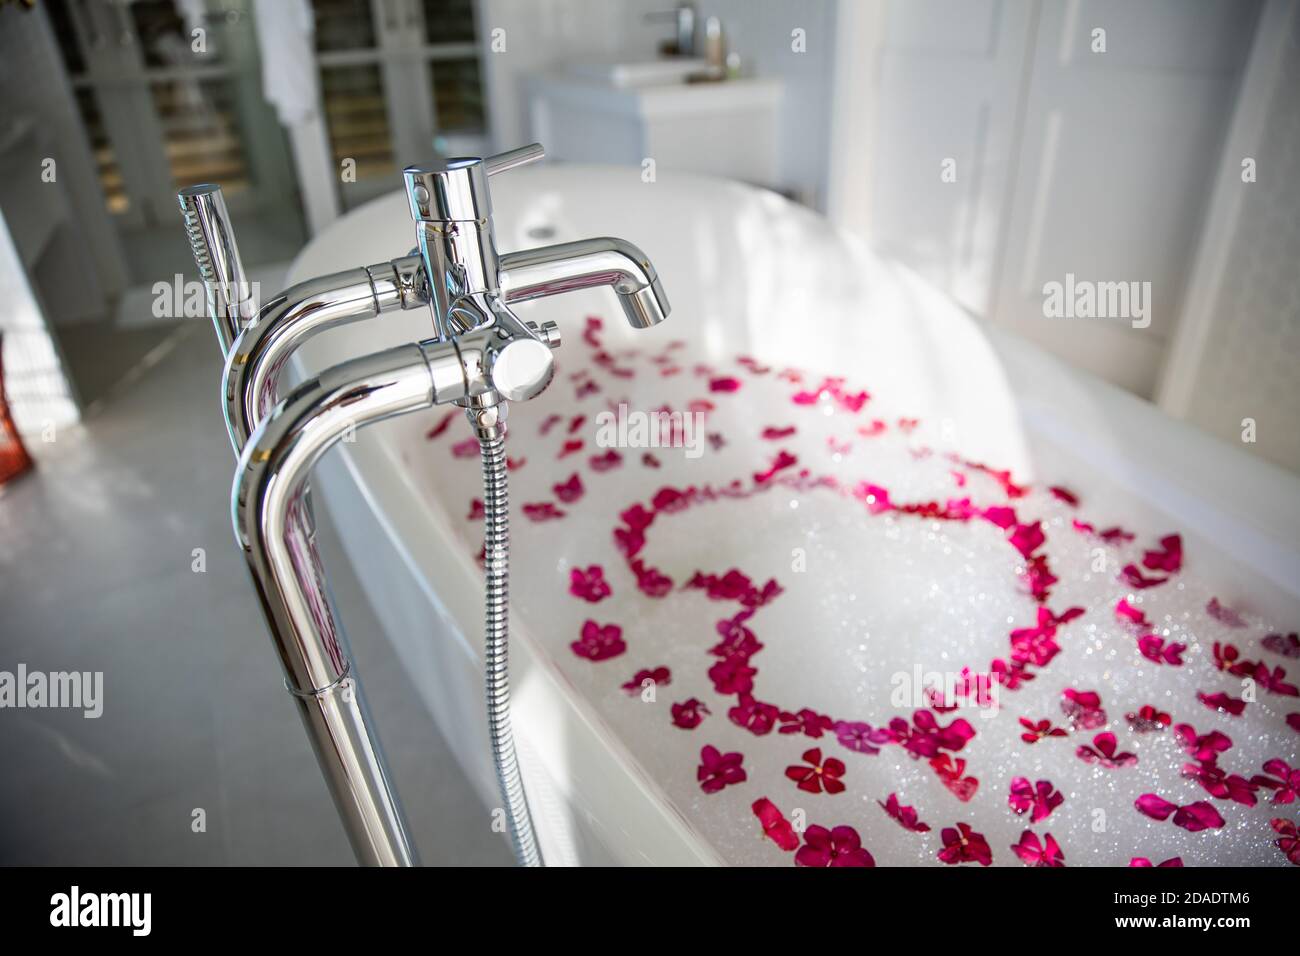 Bathtub with Romantic Scented Candles and Petals, Buildings Stock Footage  ft. bathtub & candlelight - Envato Elements